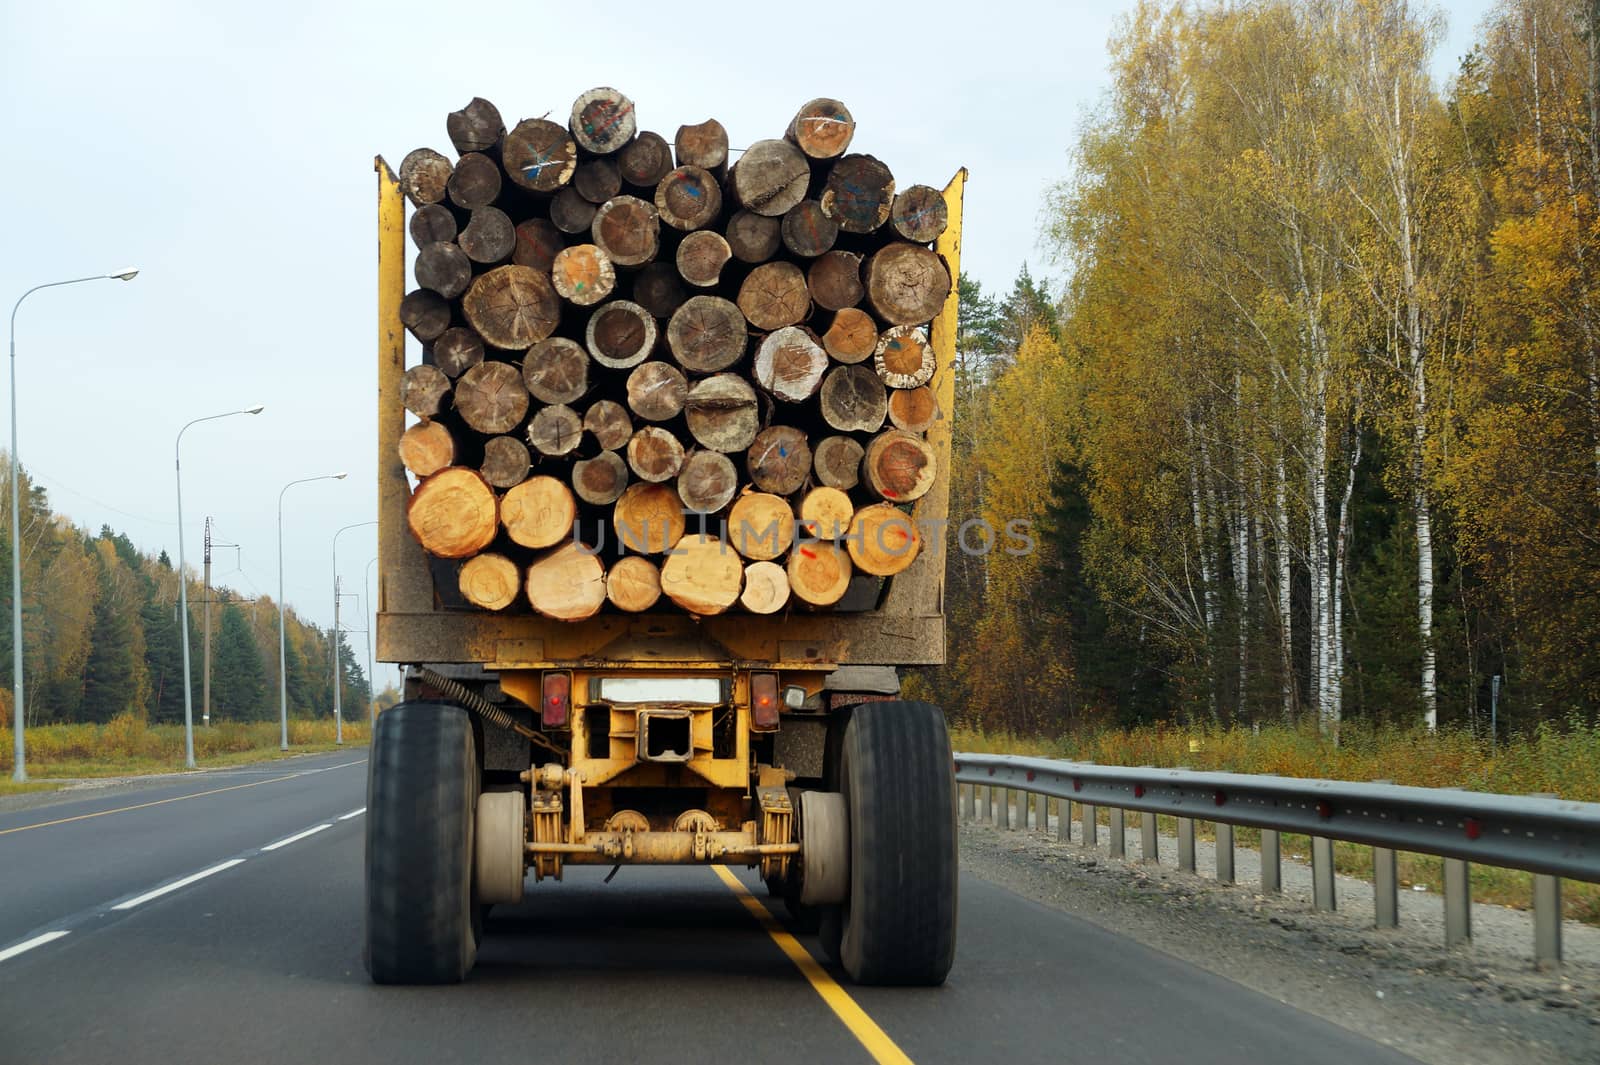 a heavy truck carries logs along the highway, back view